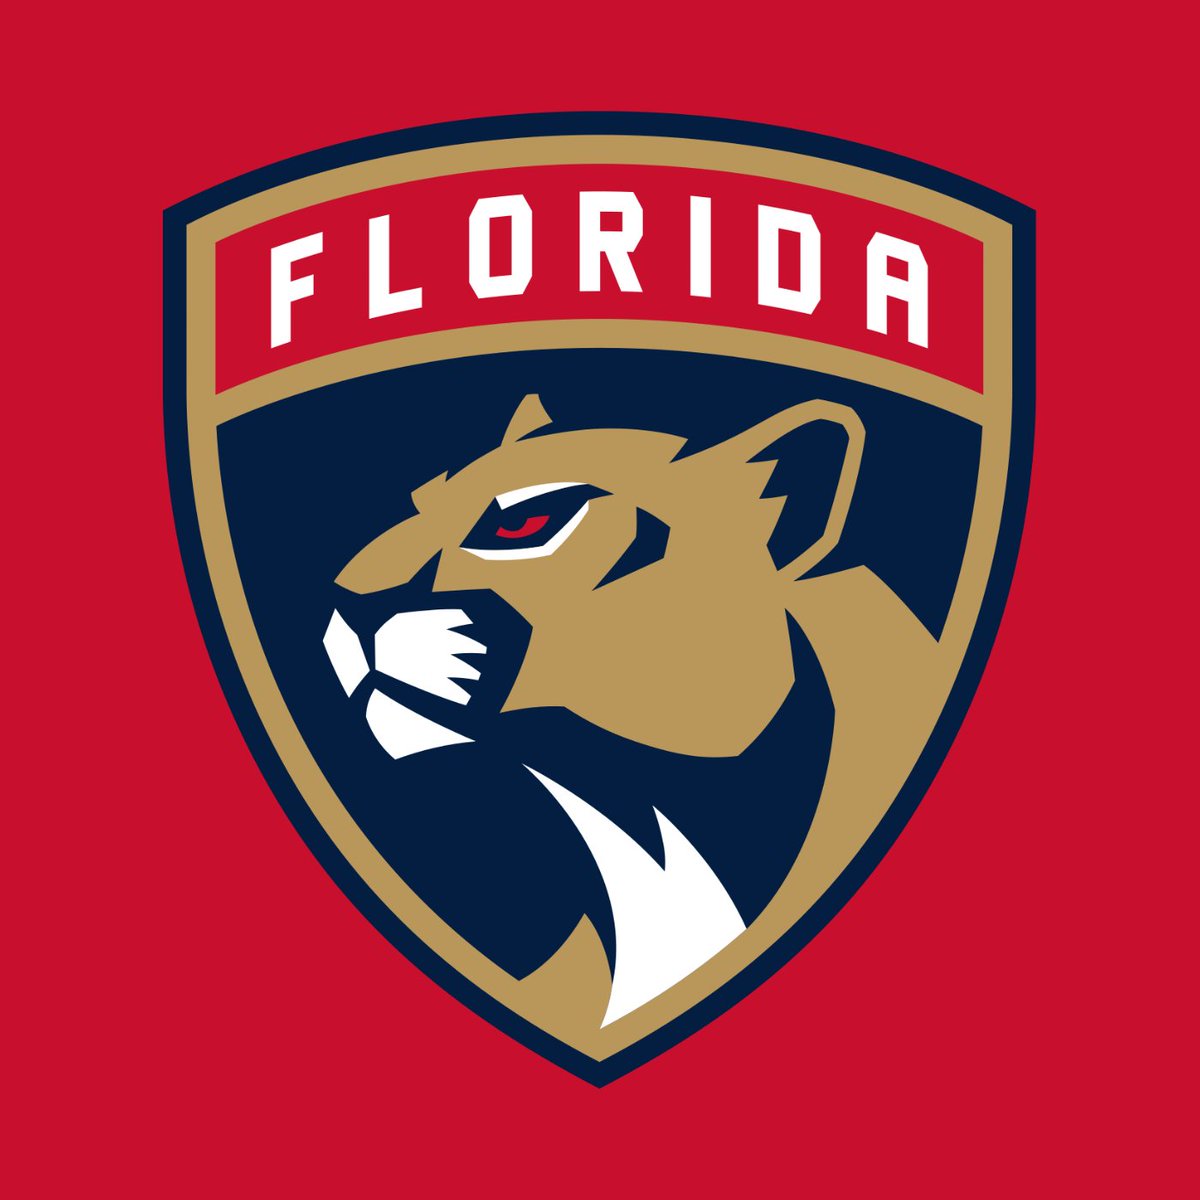 With the 181st overall selection in the NHL Draft, the Florida Panthers are proud to select: Raphael. https://t.co/0y1JbKOr9o